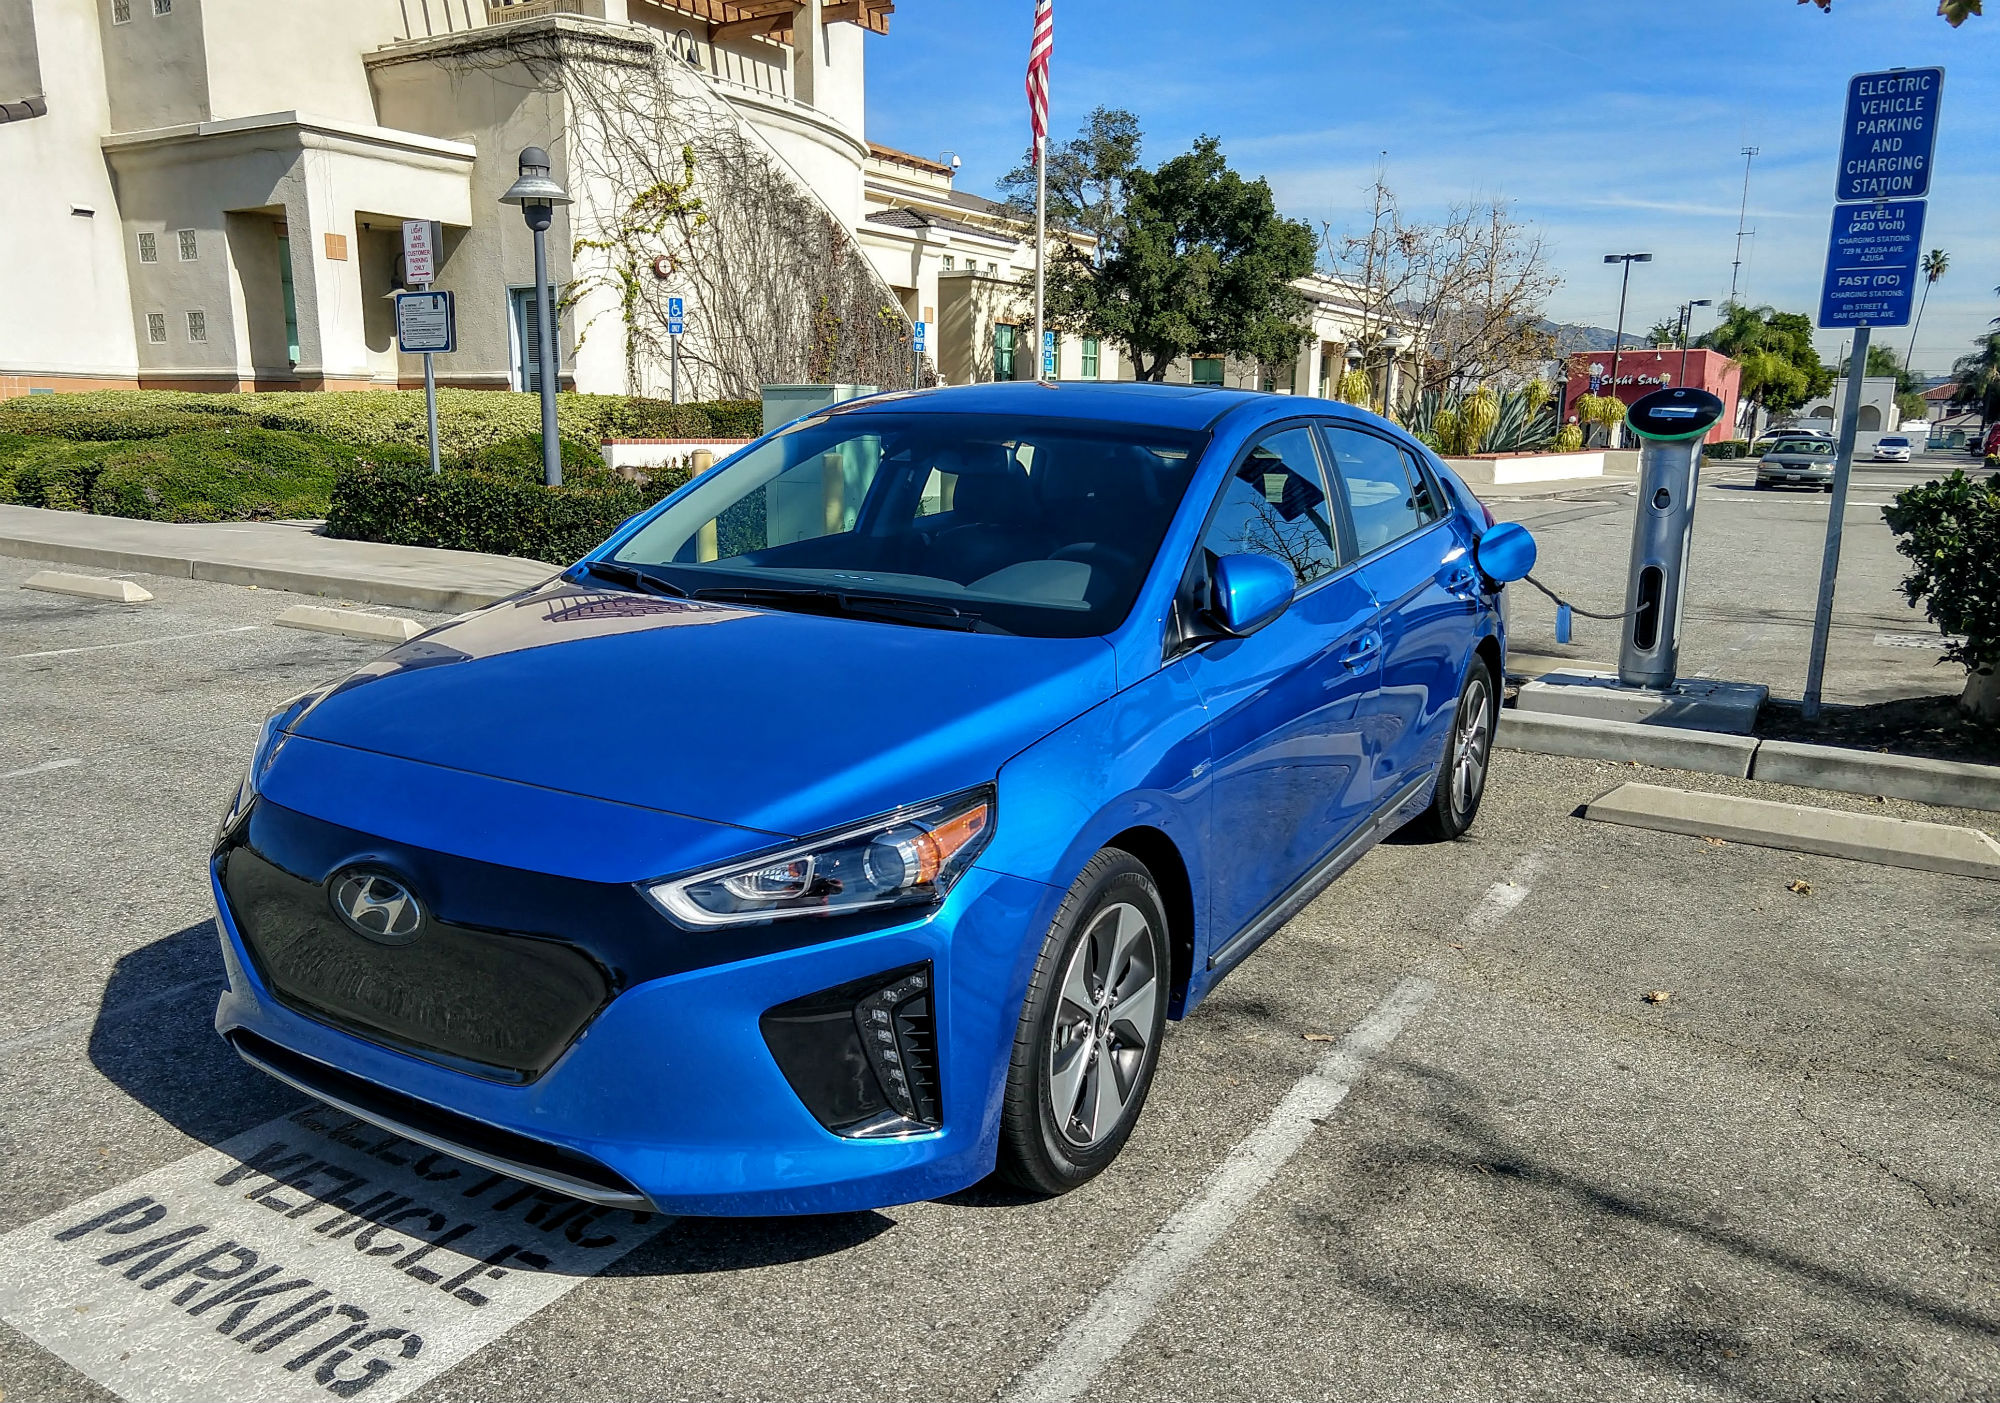 Luchtpost lucht Bij naam 2017 Hyundai Ioniq Electric Review: Going the Distance - TheIgnitionBlog.com